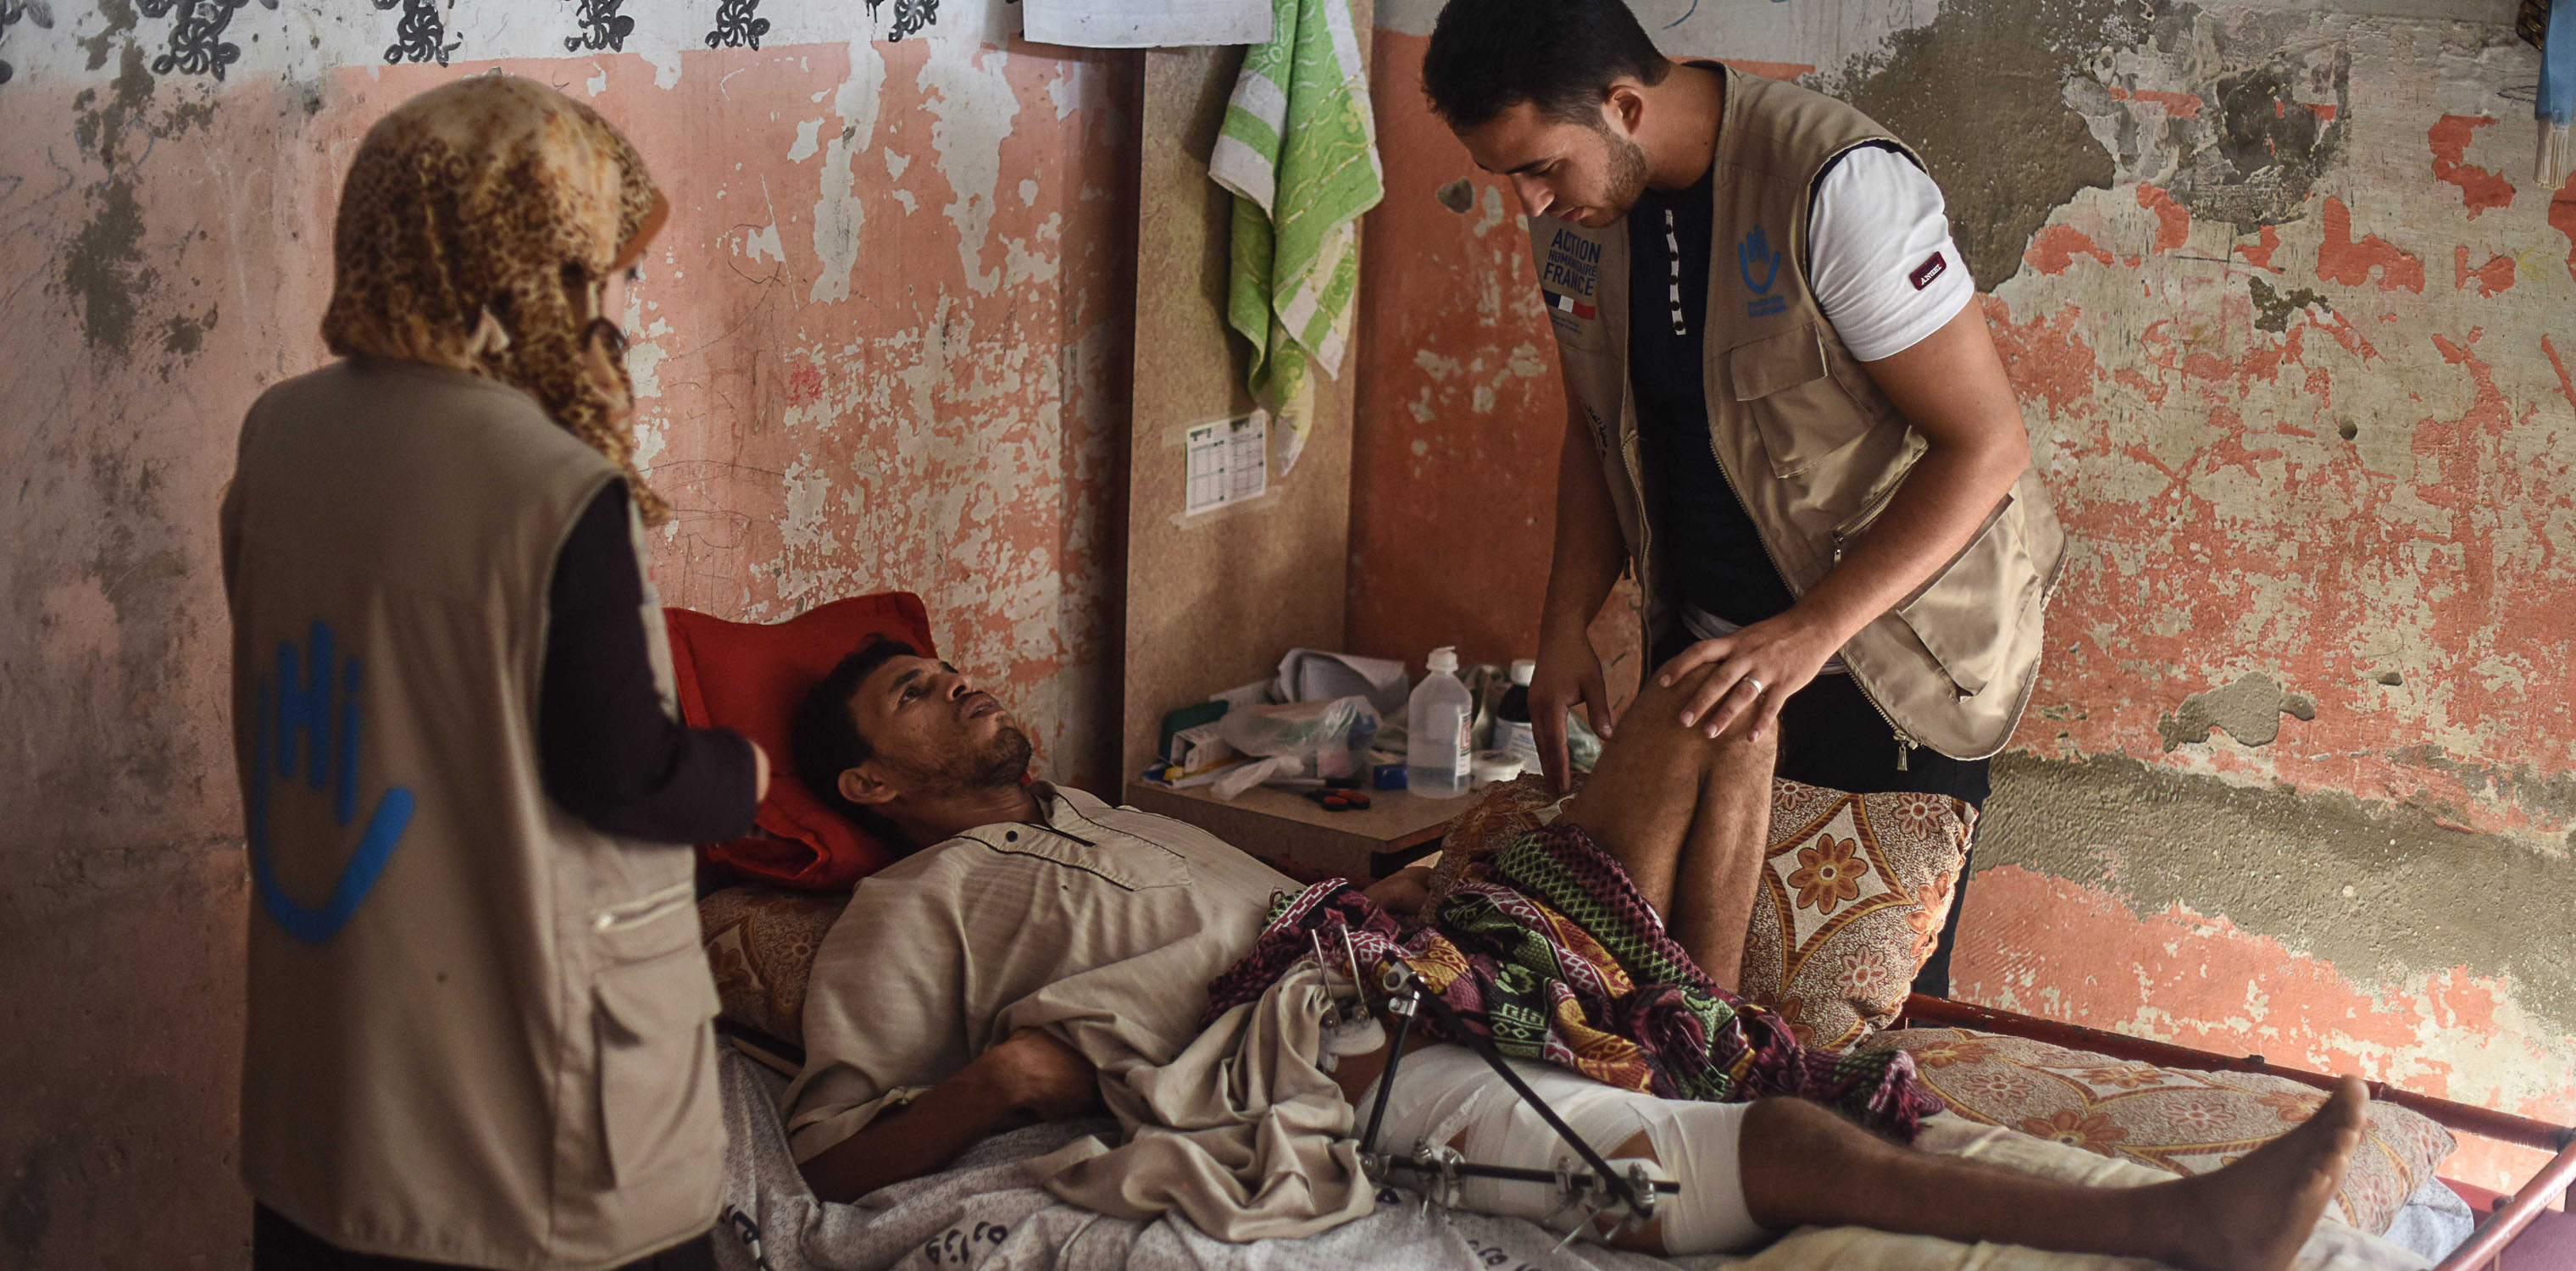 Gaza, rehabilitation session set up by HI for one injured person